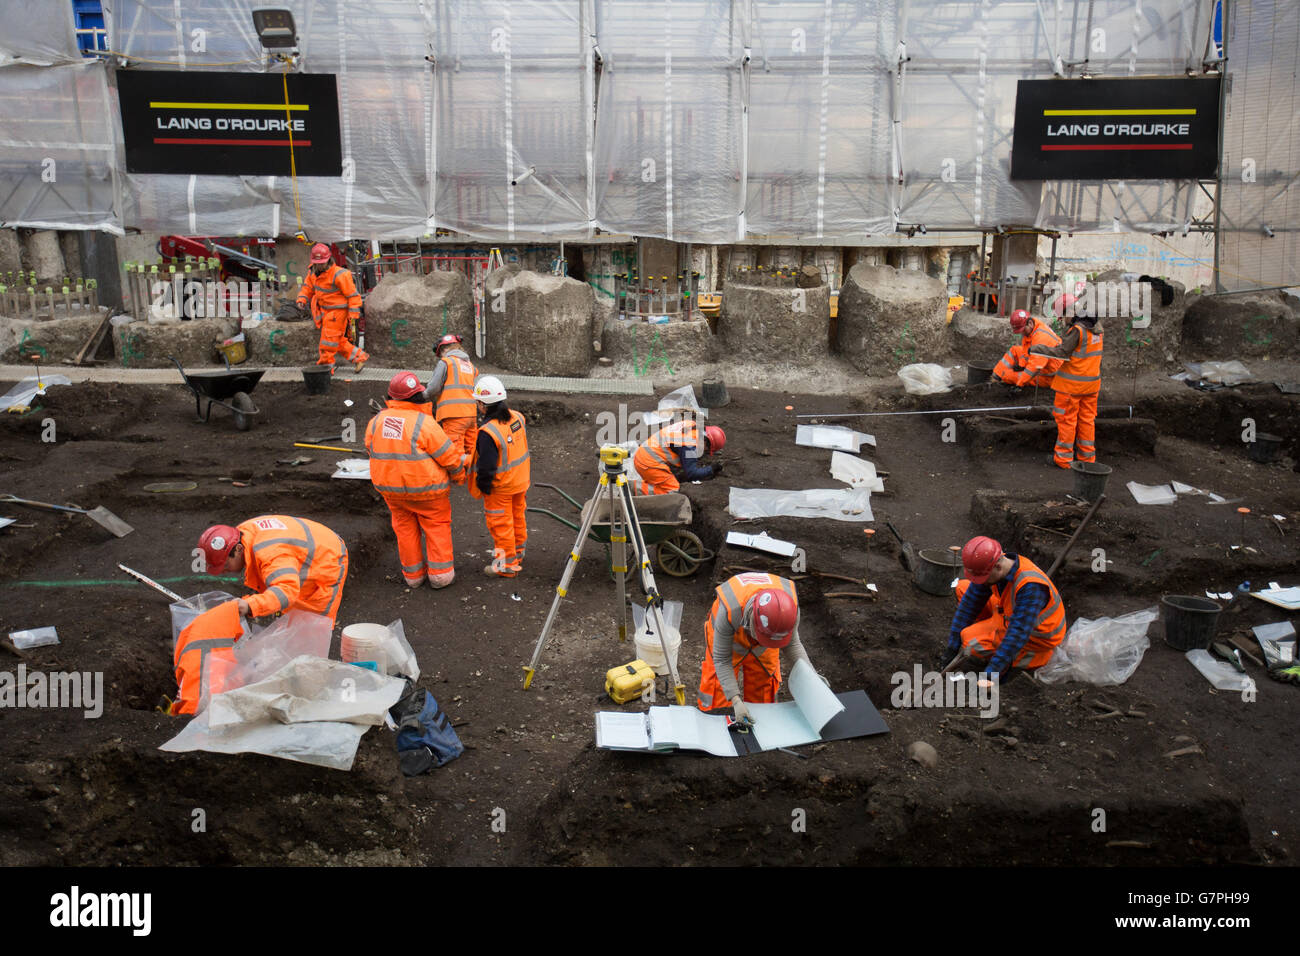 Archaeologists from MOLA (Museum of London Archaeology) at work on the Bedlam burial ground where over 20,000 Londoners are believed to have been buried between 1569 and 1738, the excavation will allow the construction of East entrance of the New Liverpool St. Crossrail Ticket station, Liverpool Street, London. Stock Photo